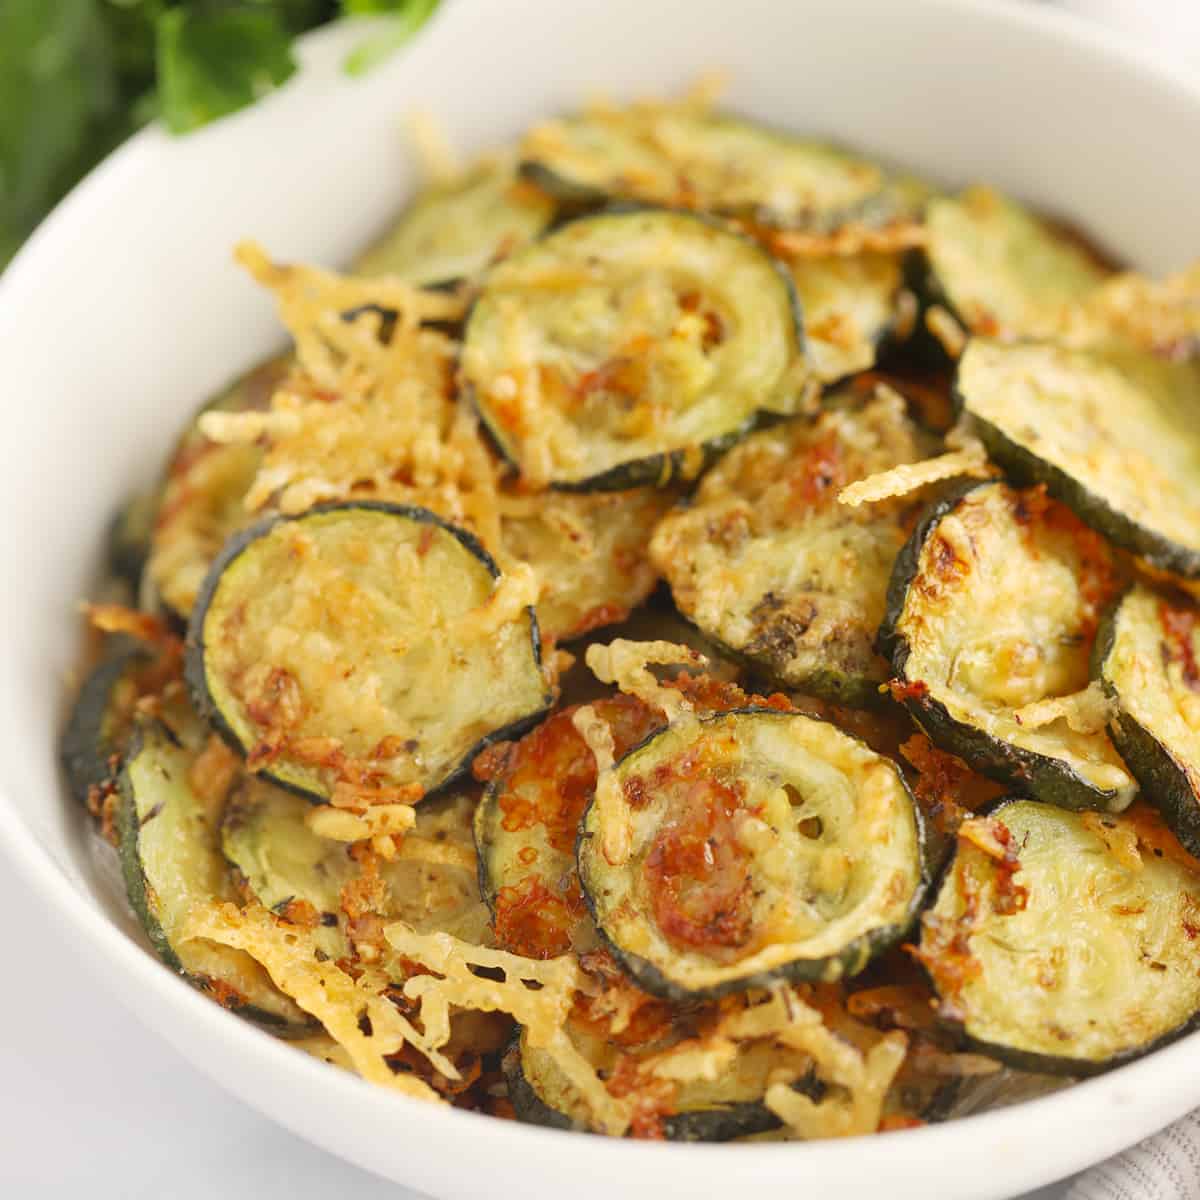 oven roasted zucchini recipe, roasted zucchini with parmesan.